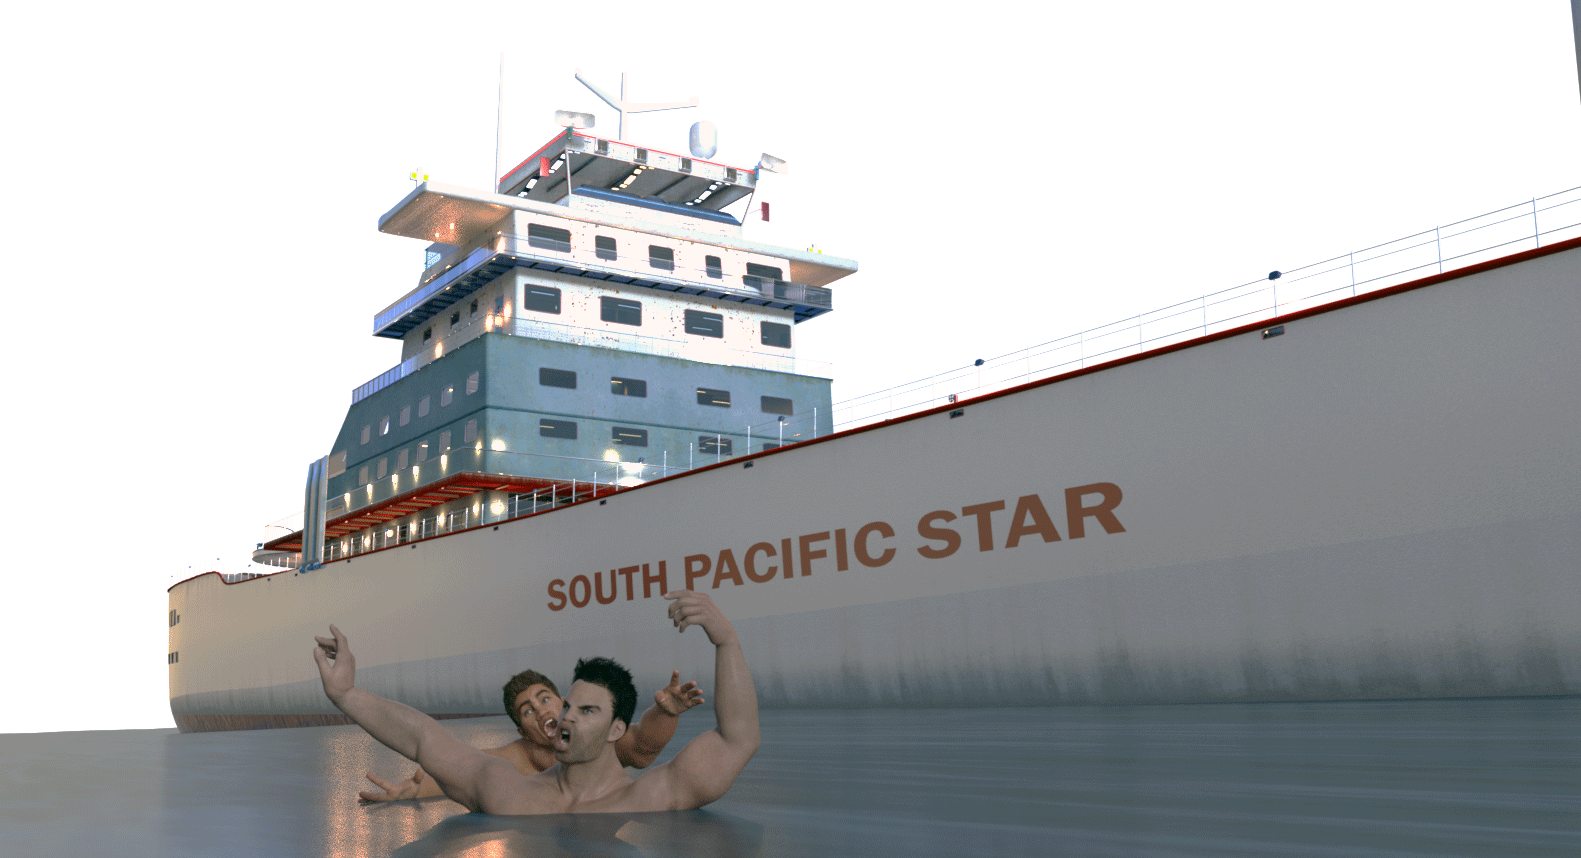 South Pacific Star crewmen overboard